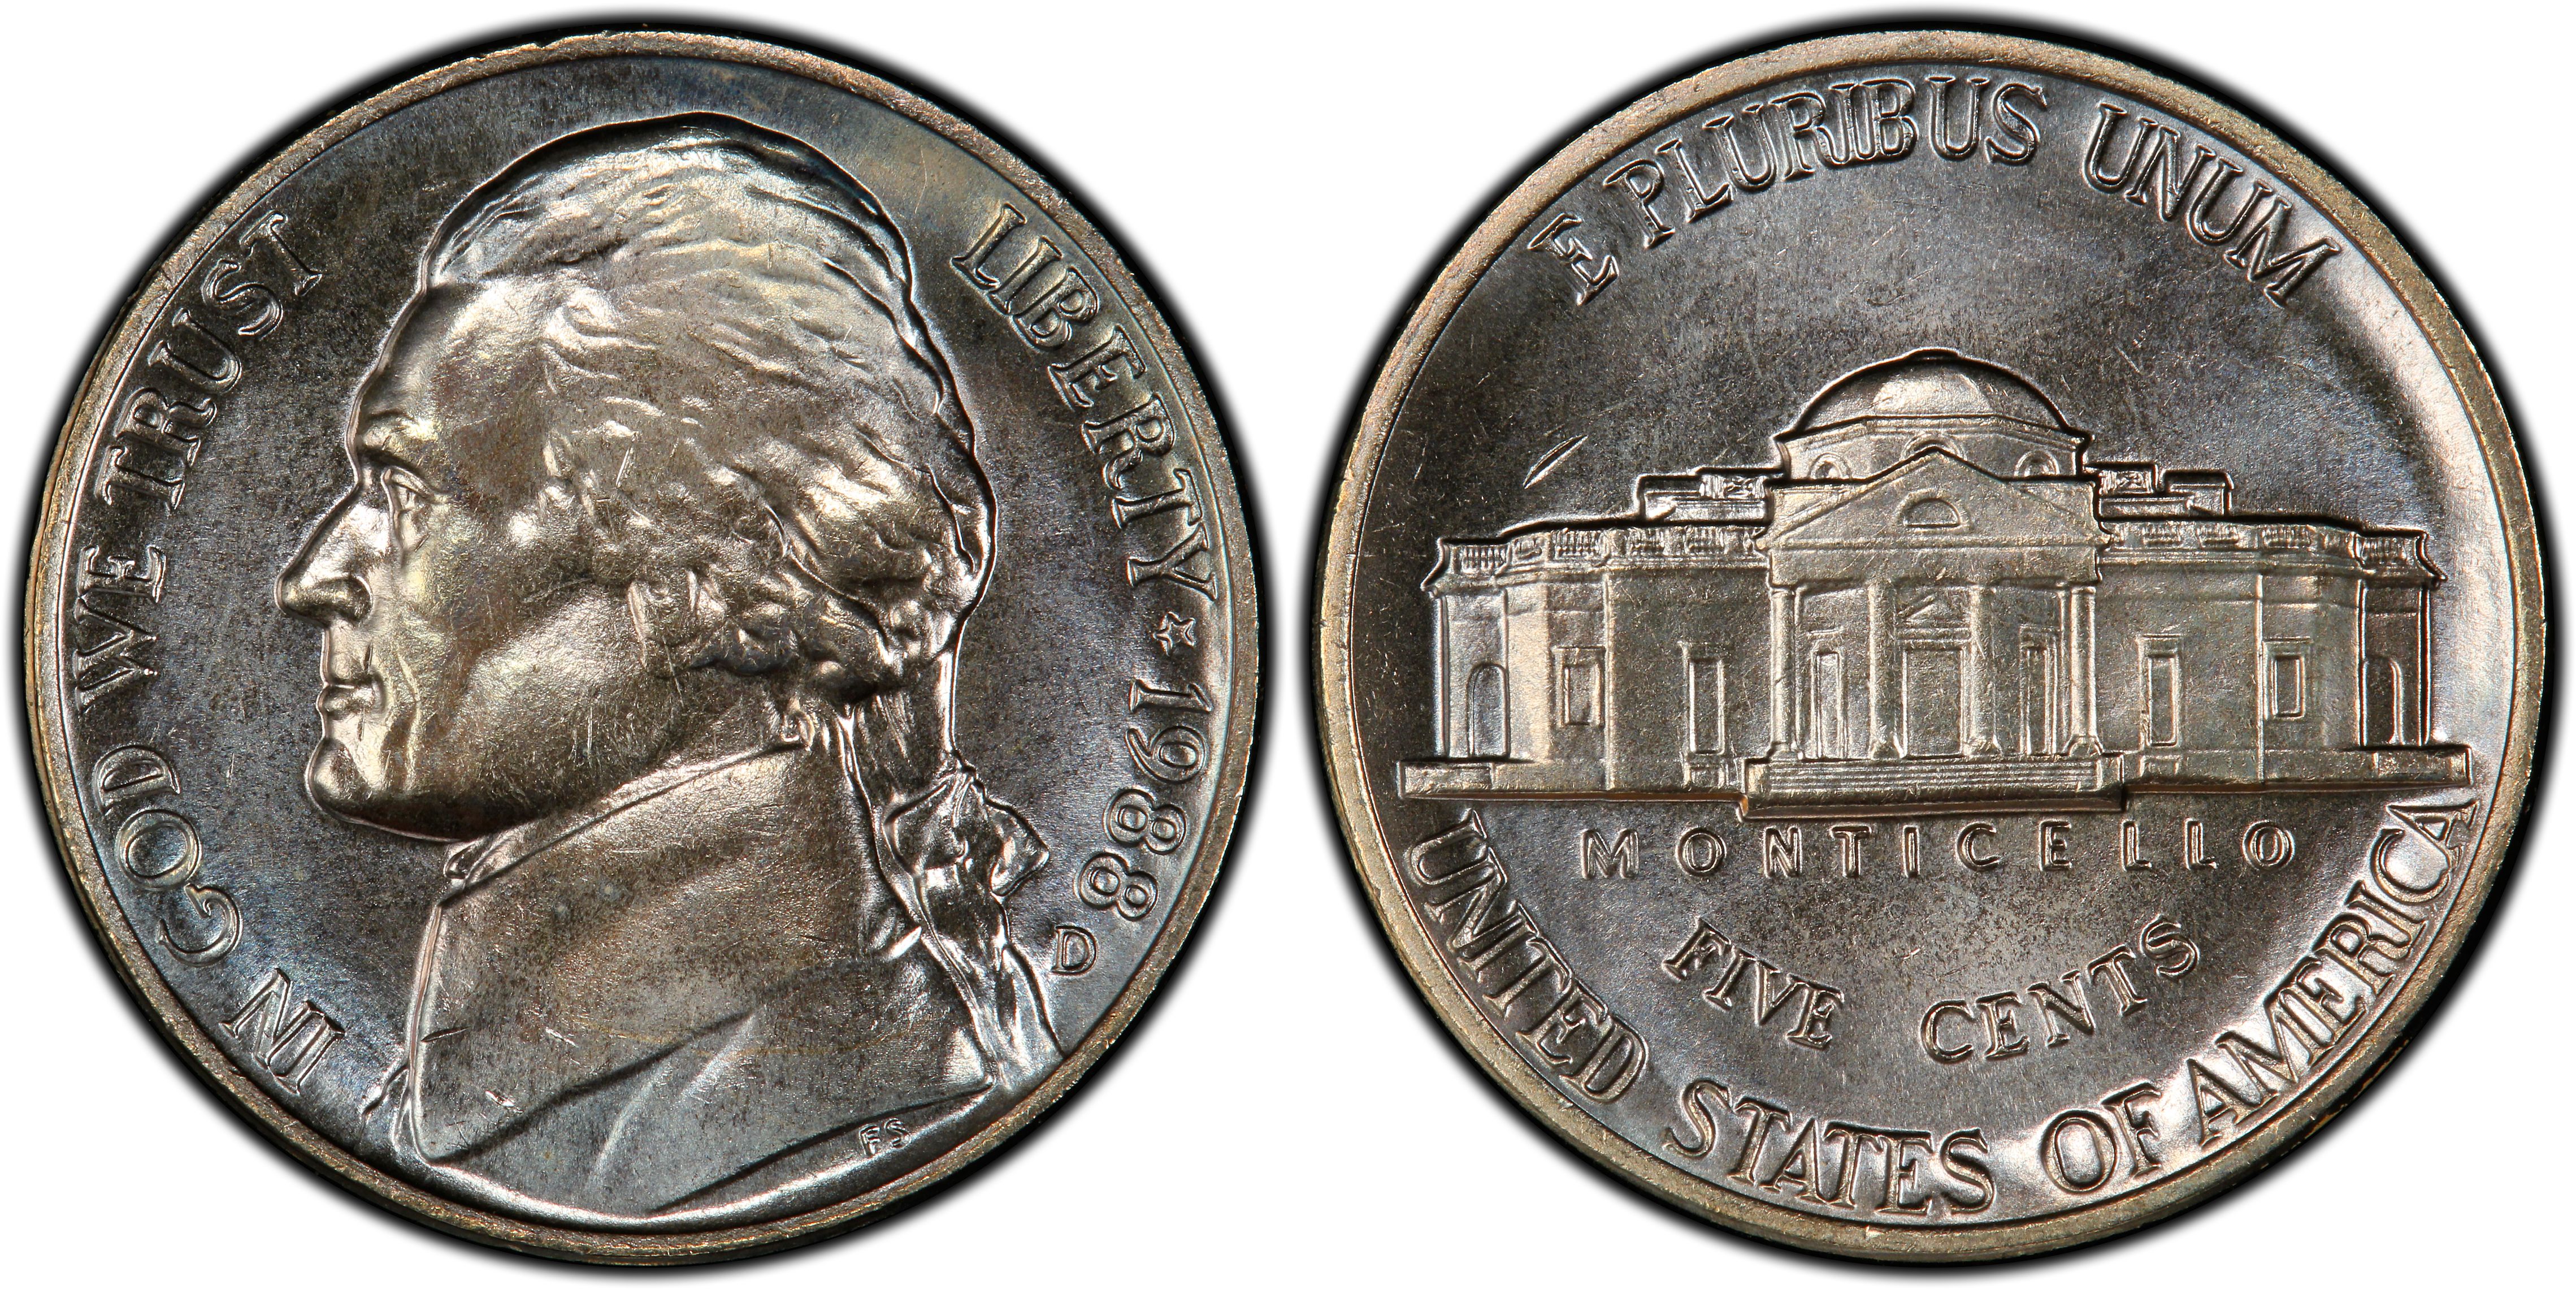 Nice 1988 s Proof Jefferson Nickel # JN 08  20 Available  Buy 1 or up to  20